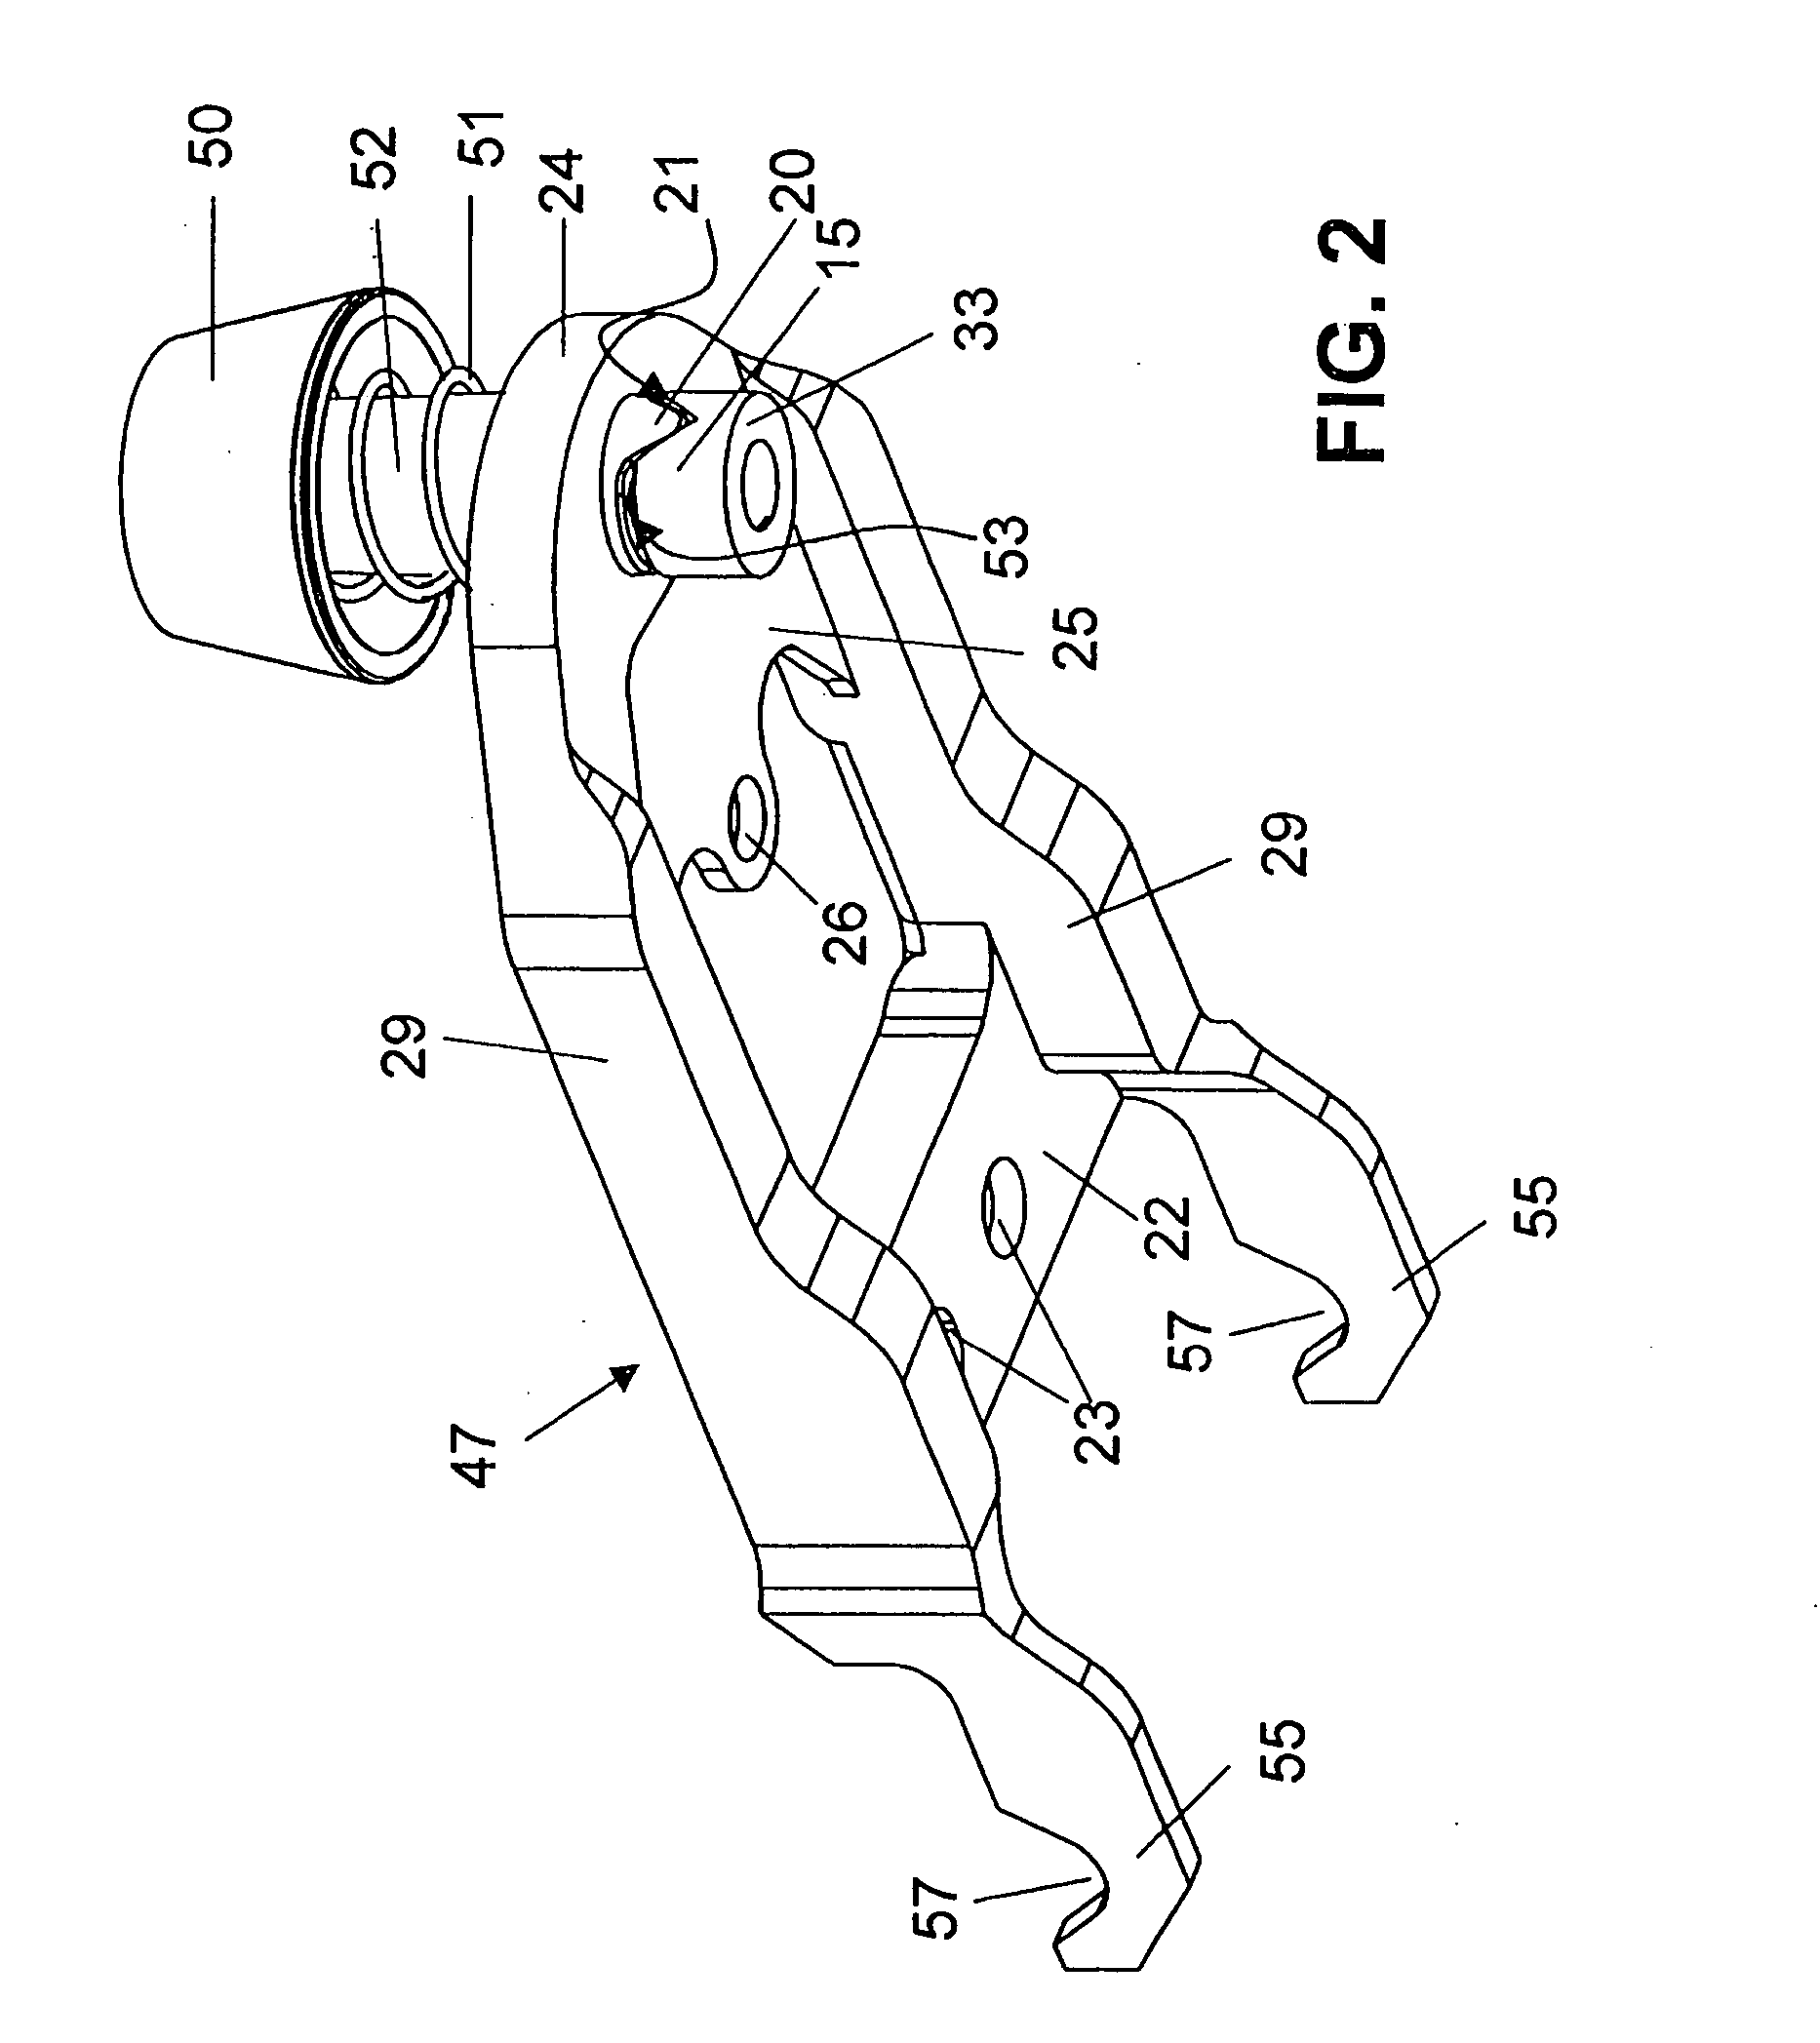 Weighing pan carrier with overload protection device